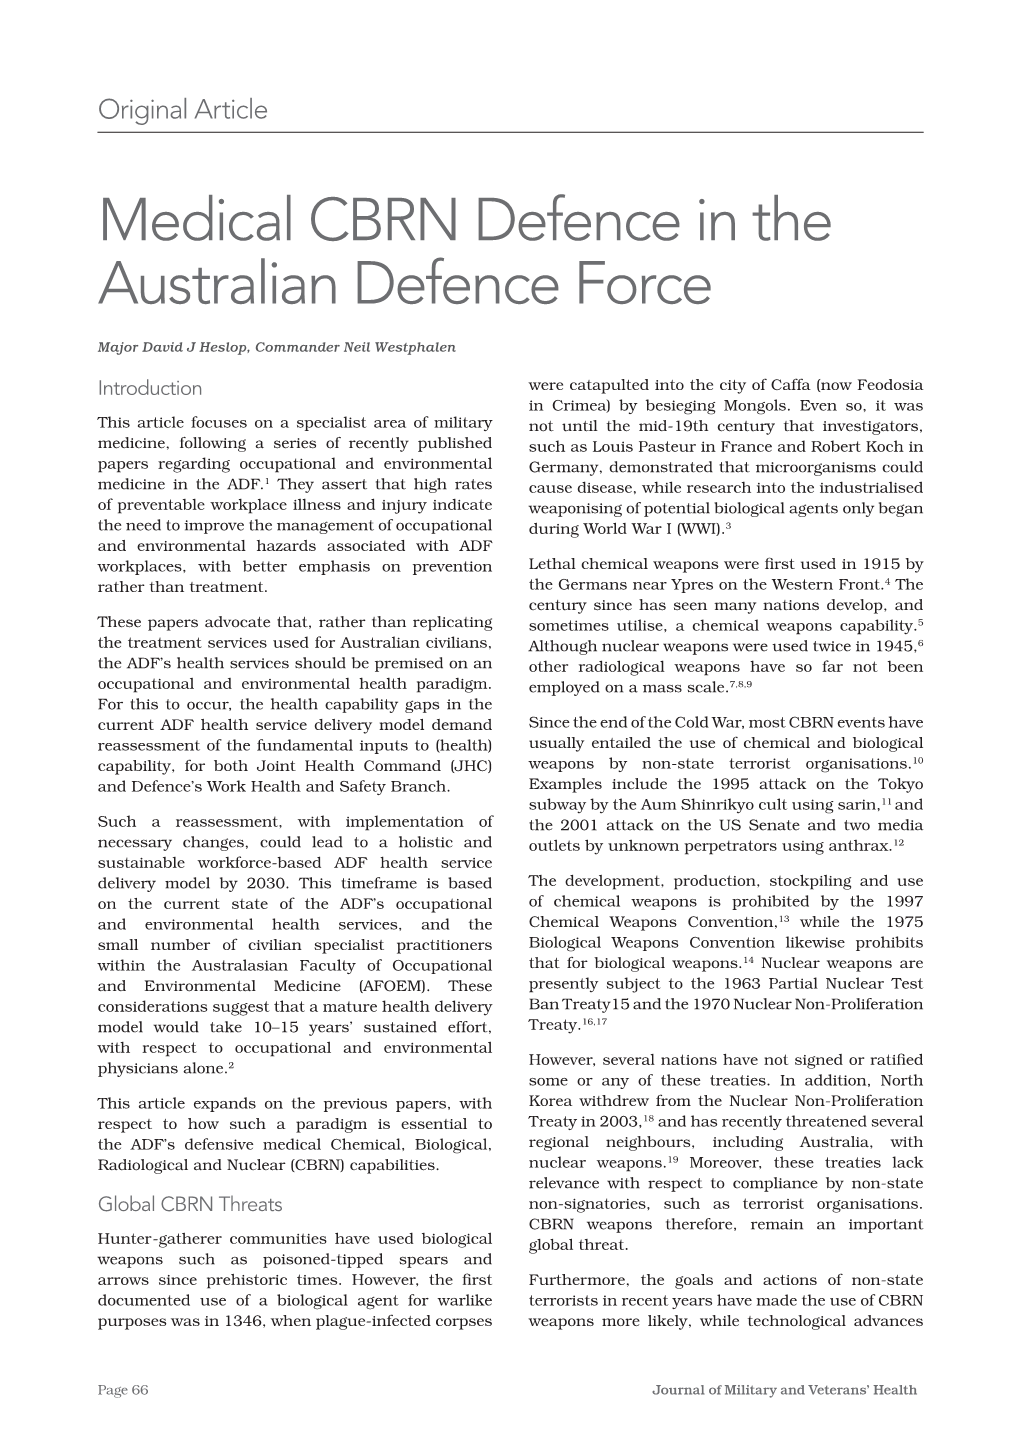 Medical CBRN Defence in the Australian Defence Force